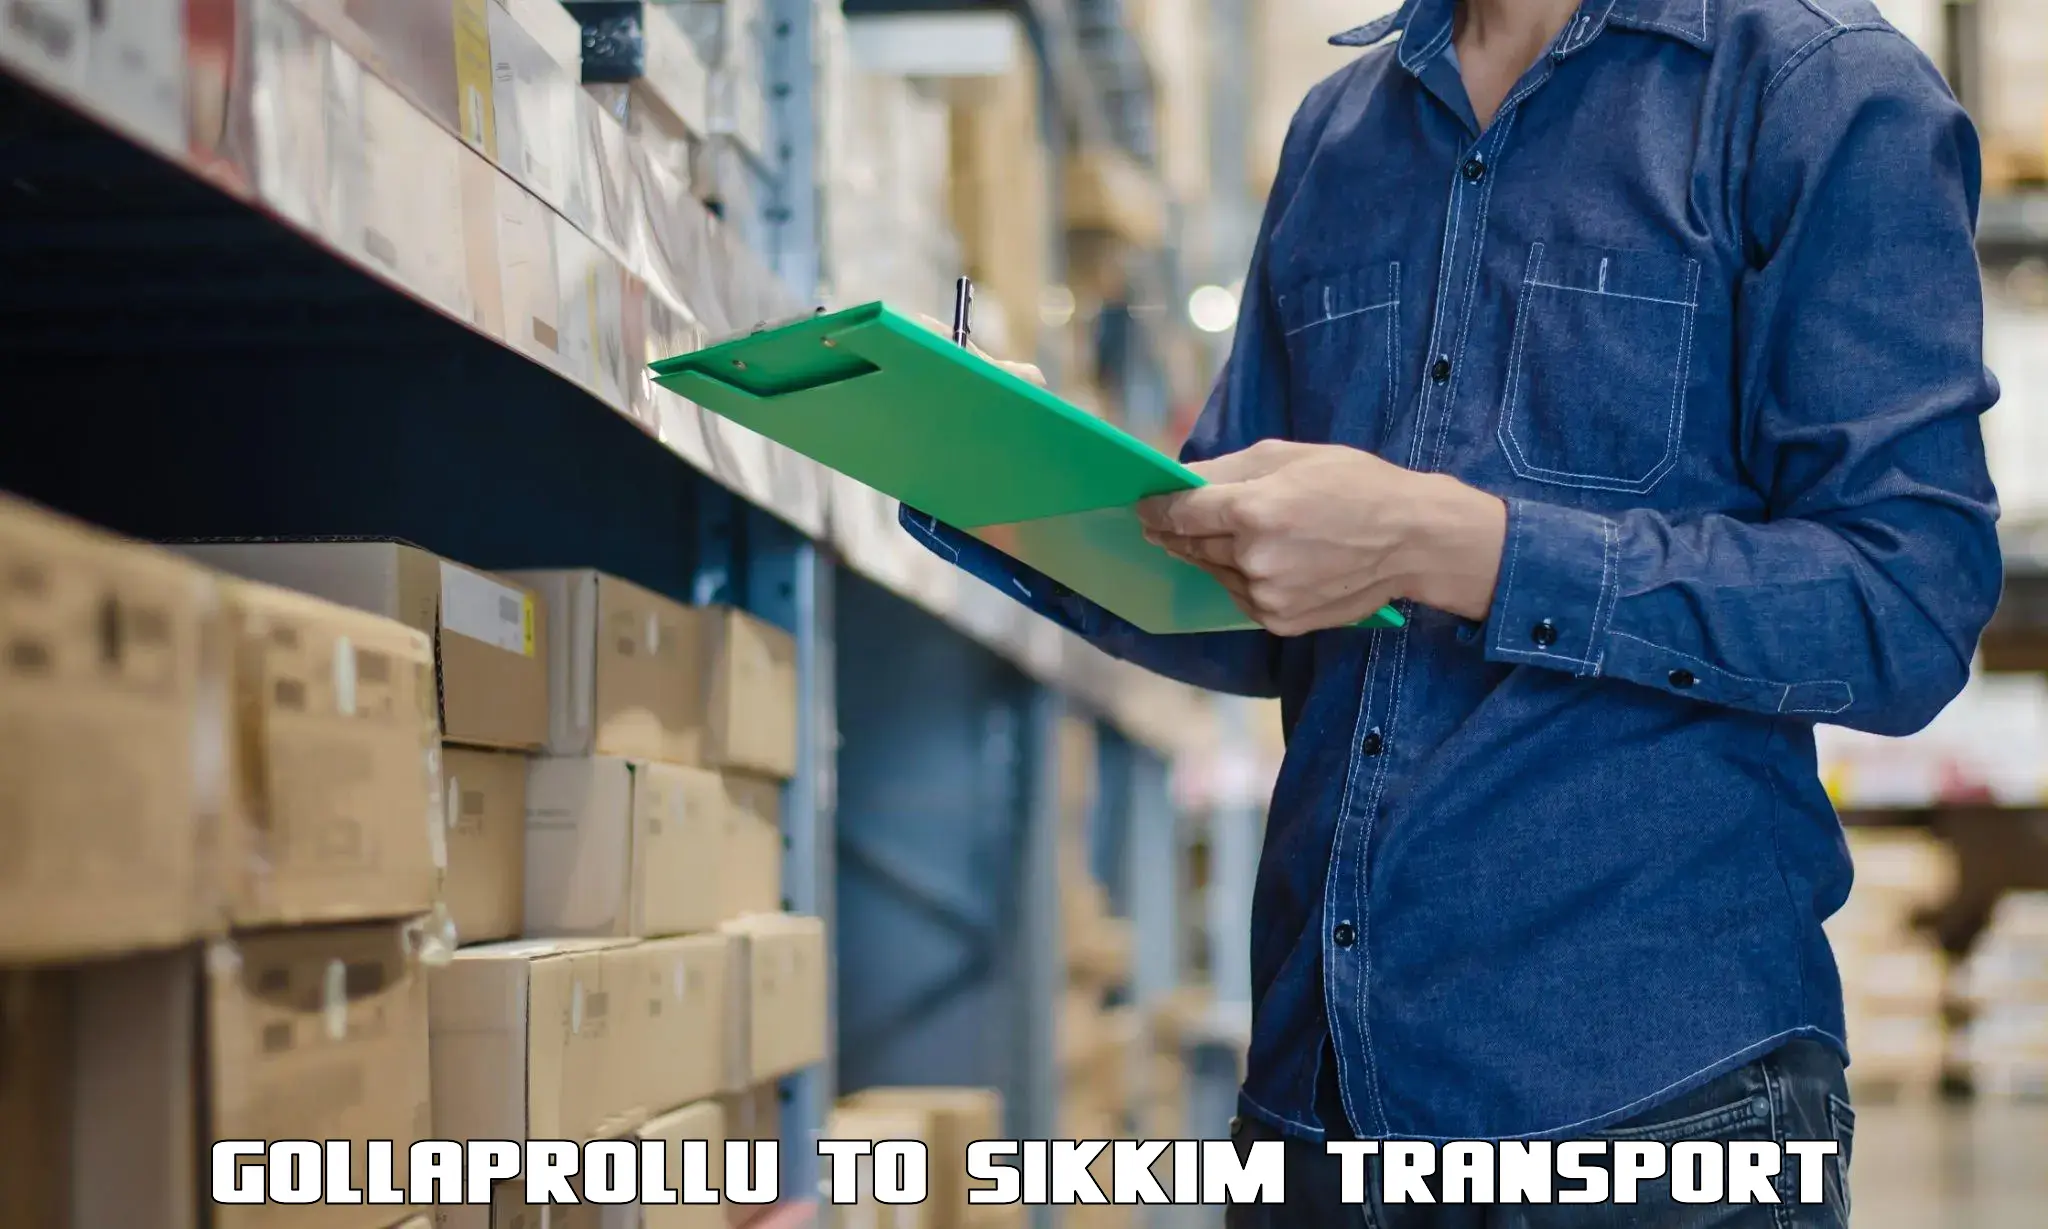 Interstate goods transport Gollaprollu to South Sikkim